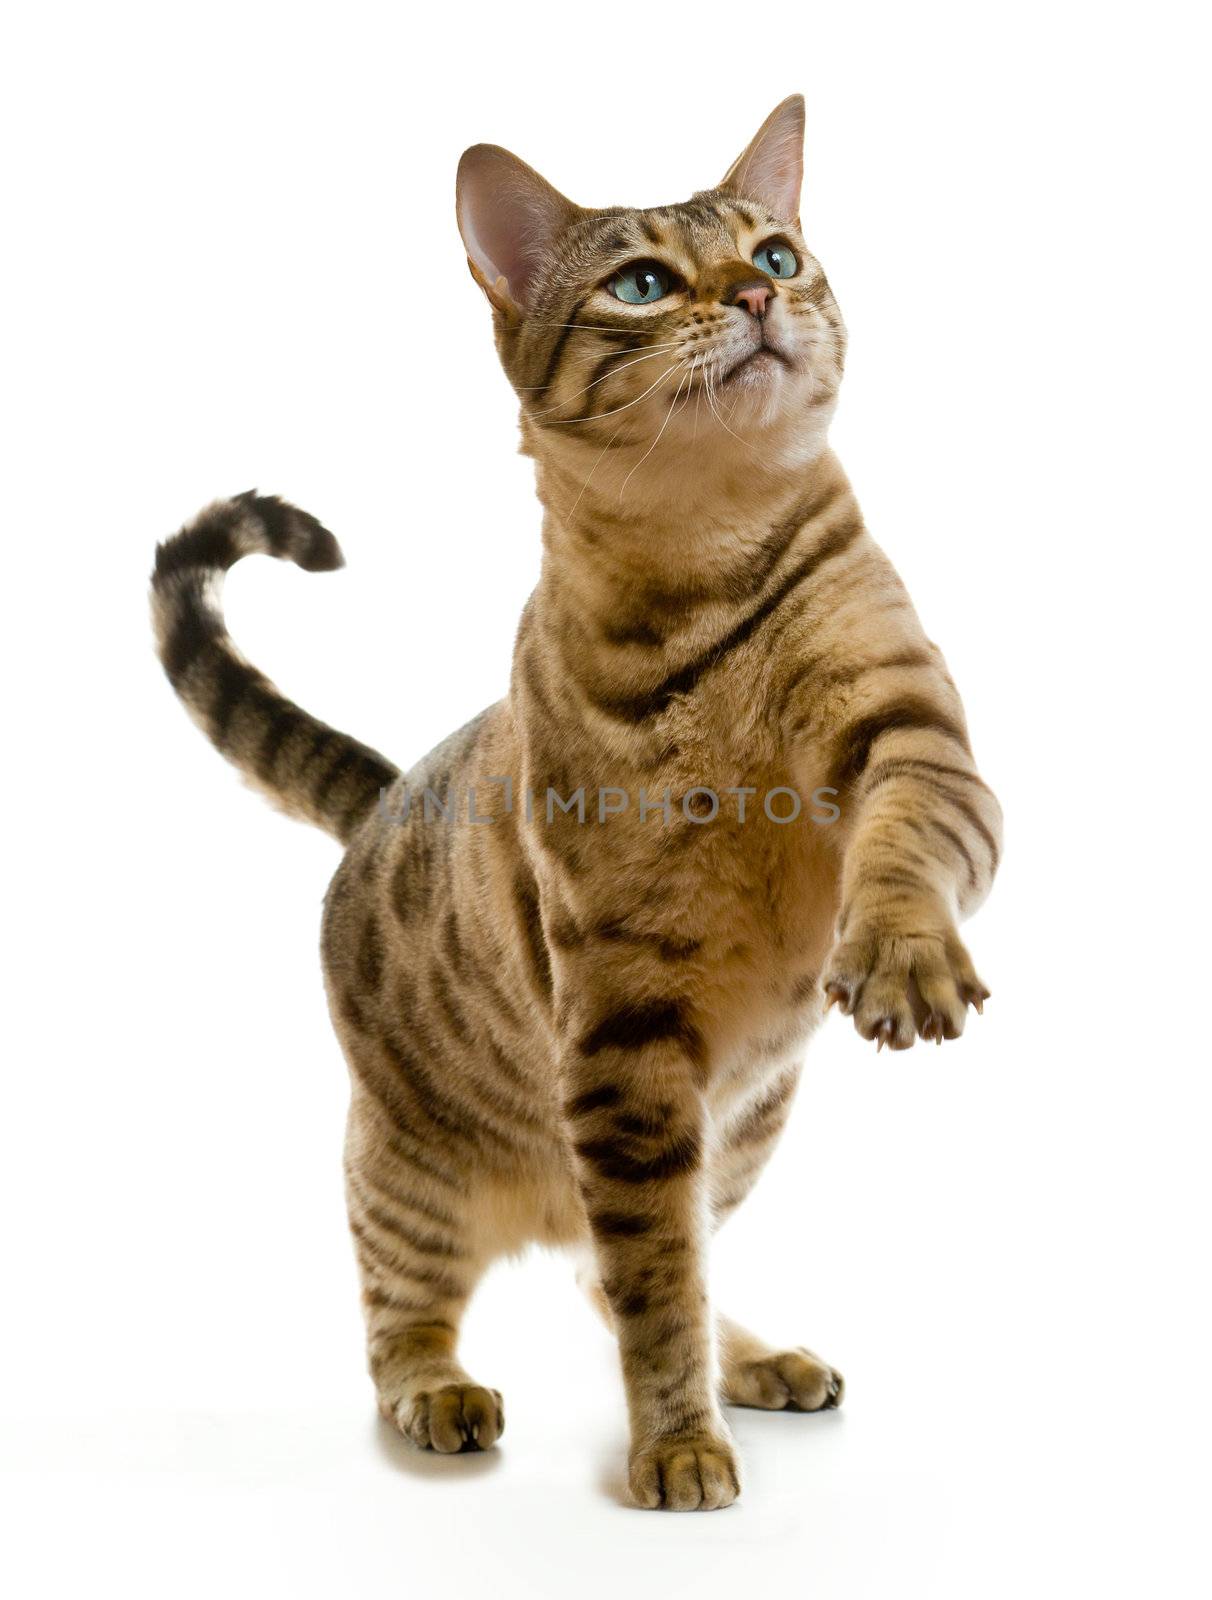 Young bengal cat or kitten clawing at the air while looking upwards towards some food